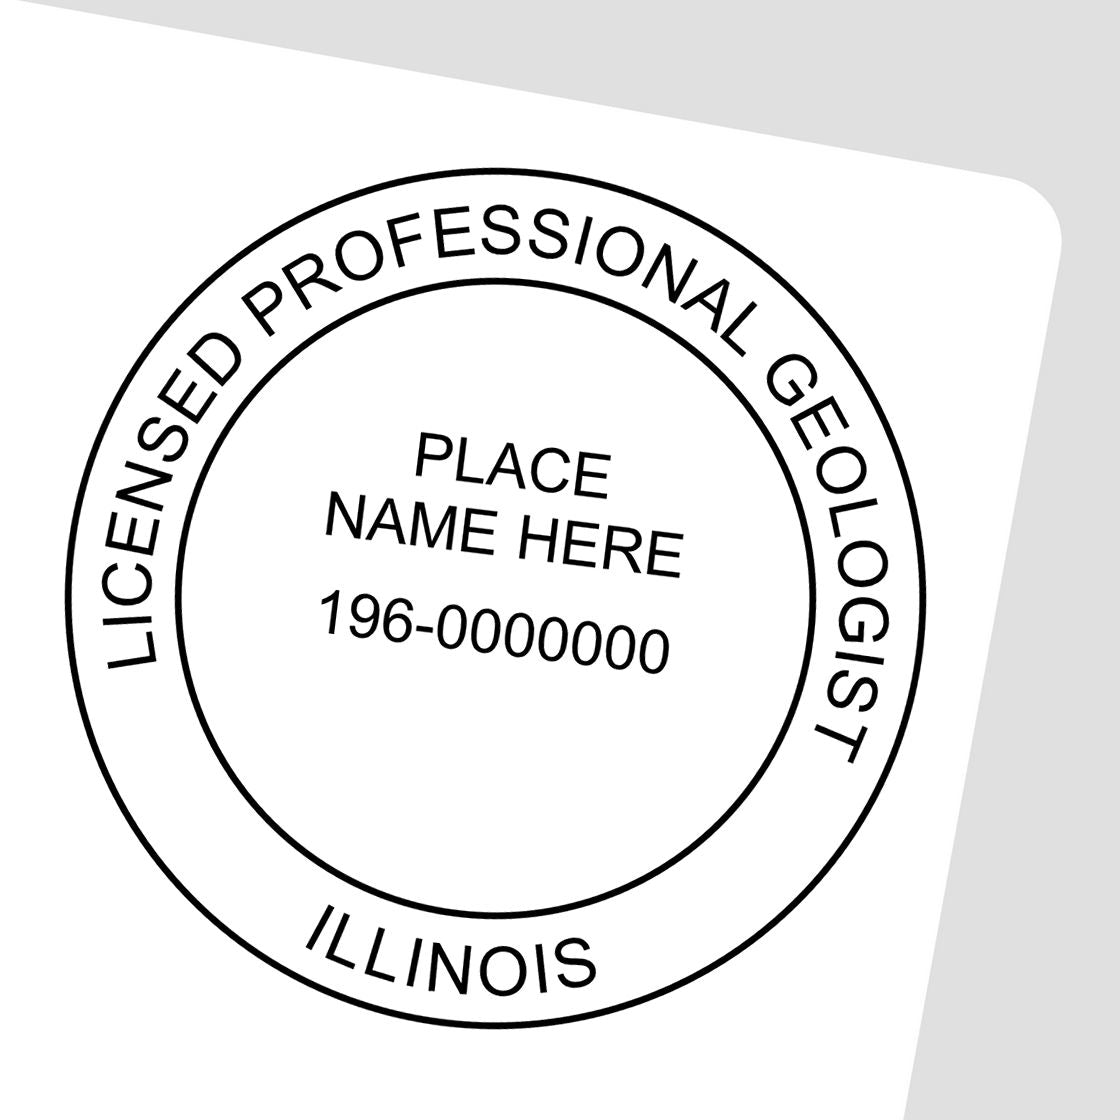 The Illinois Professional Geologist Seal Stamp stamp impression comes to life with a crisp, detailed image stamped on paper - showcasing true professional quality.